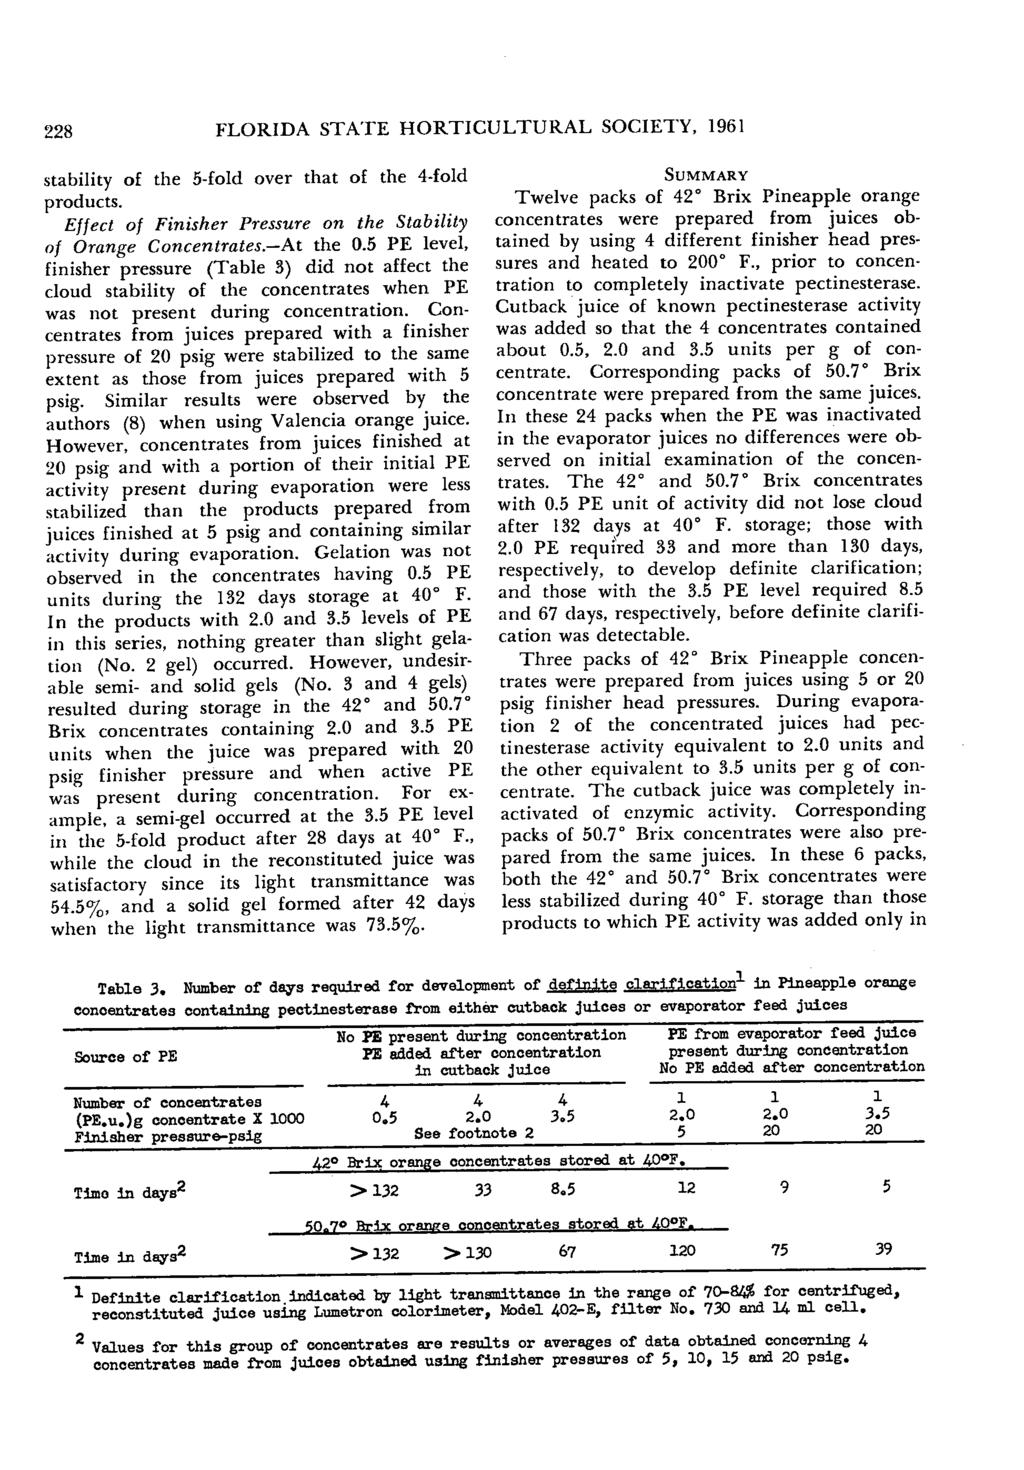 228 FLORIDA STATE HORTICULTURAL SOCIETY, 1961 stability of the 5-fold over that of the 4-fold products. Effect of Finisher Pressure on the Stability of Orange Concentrates.